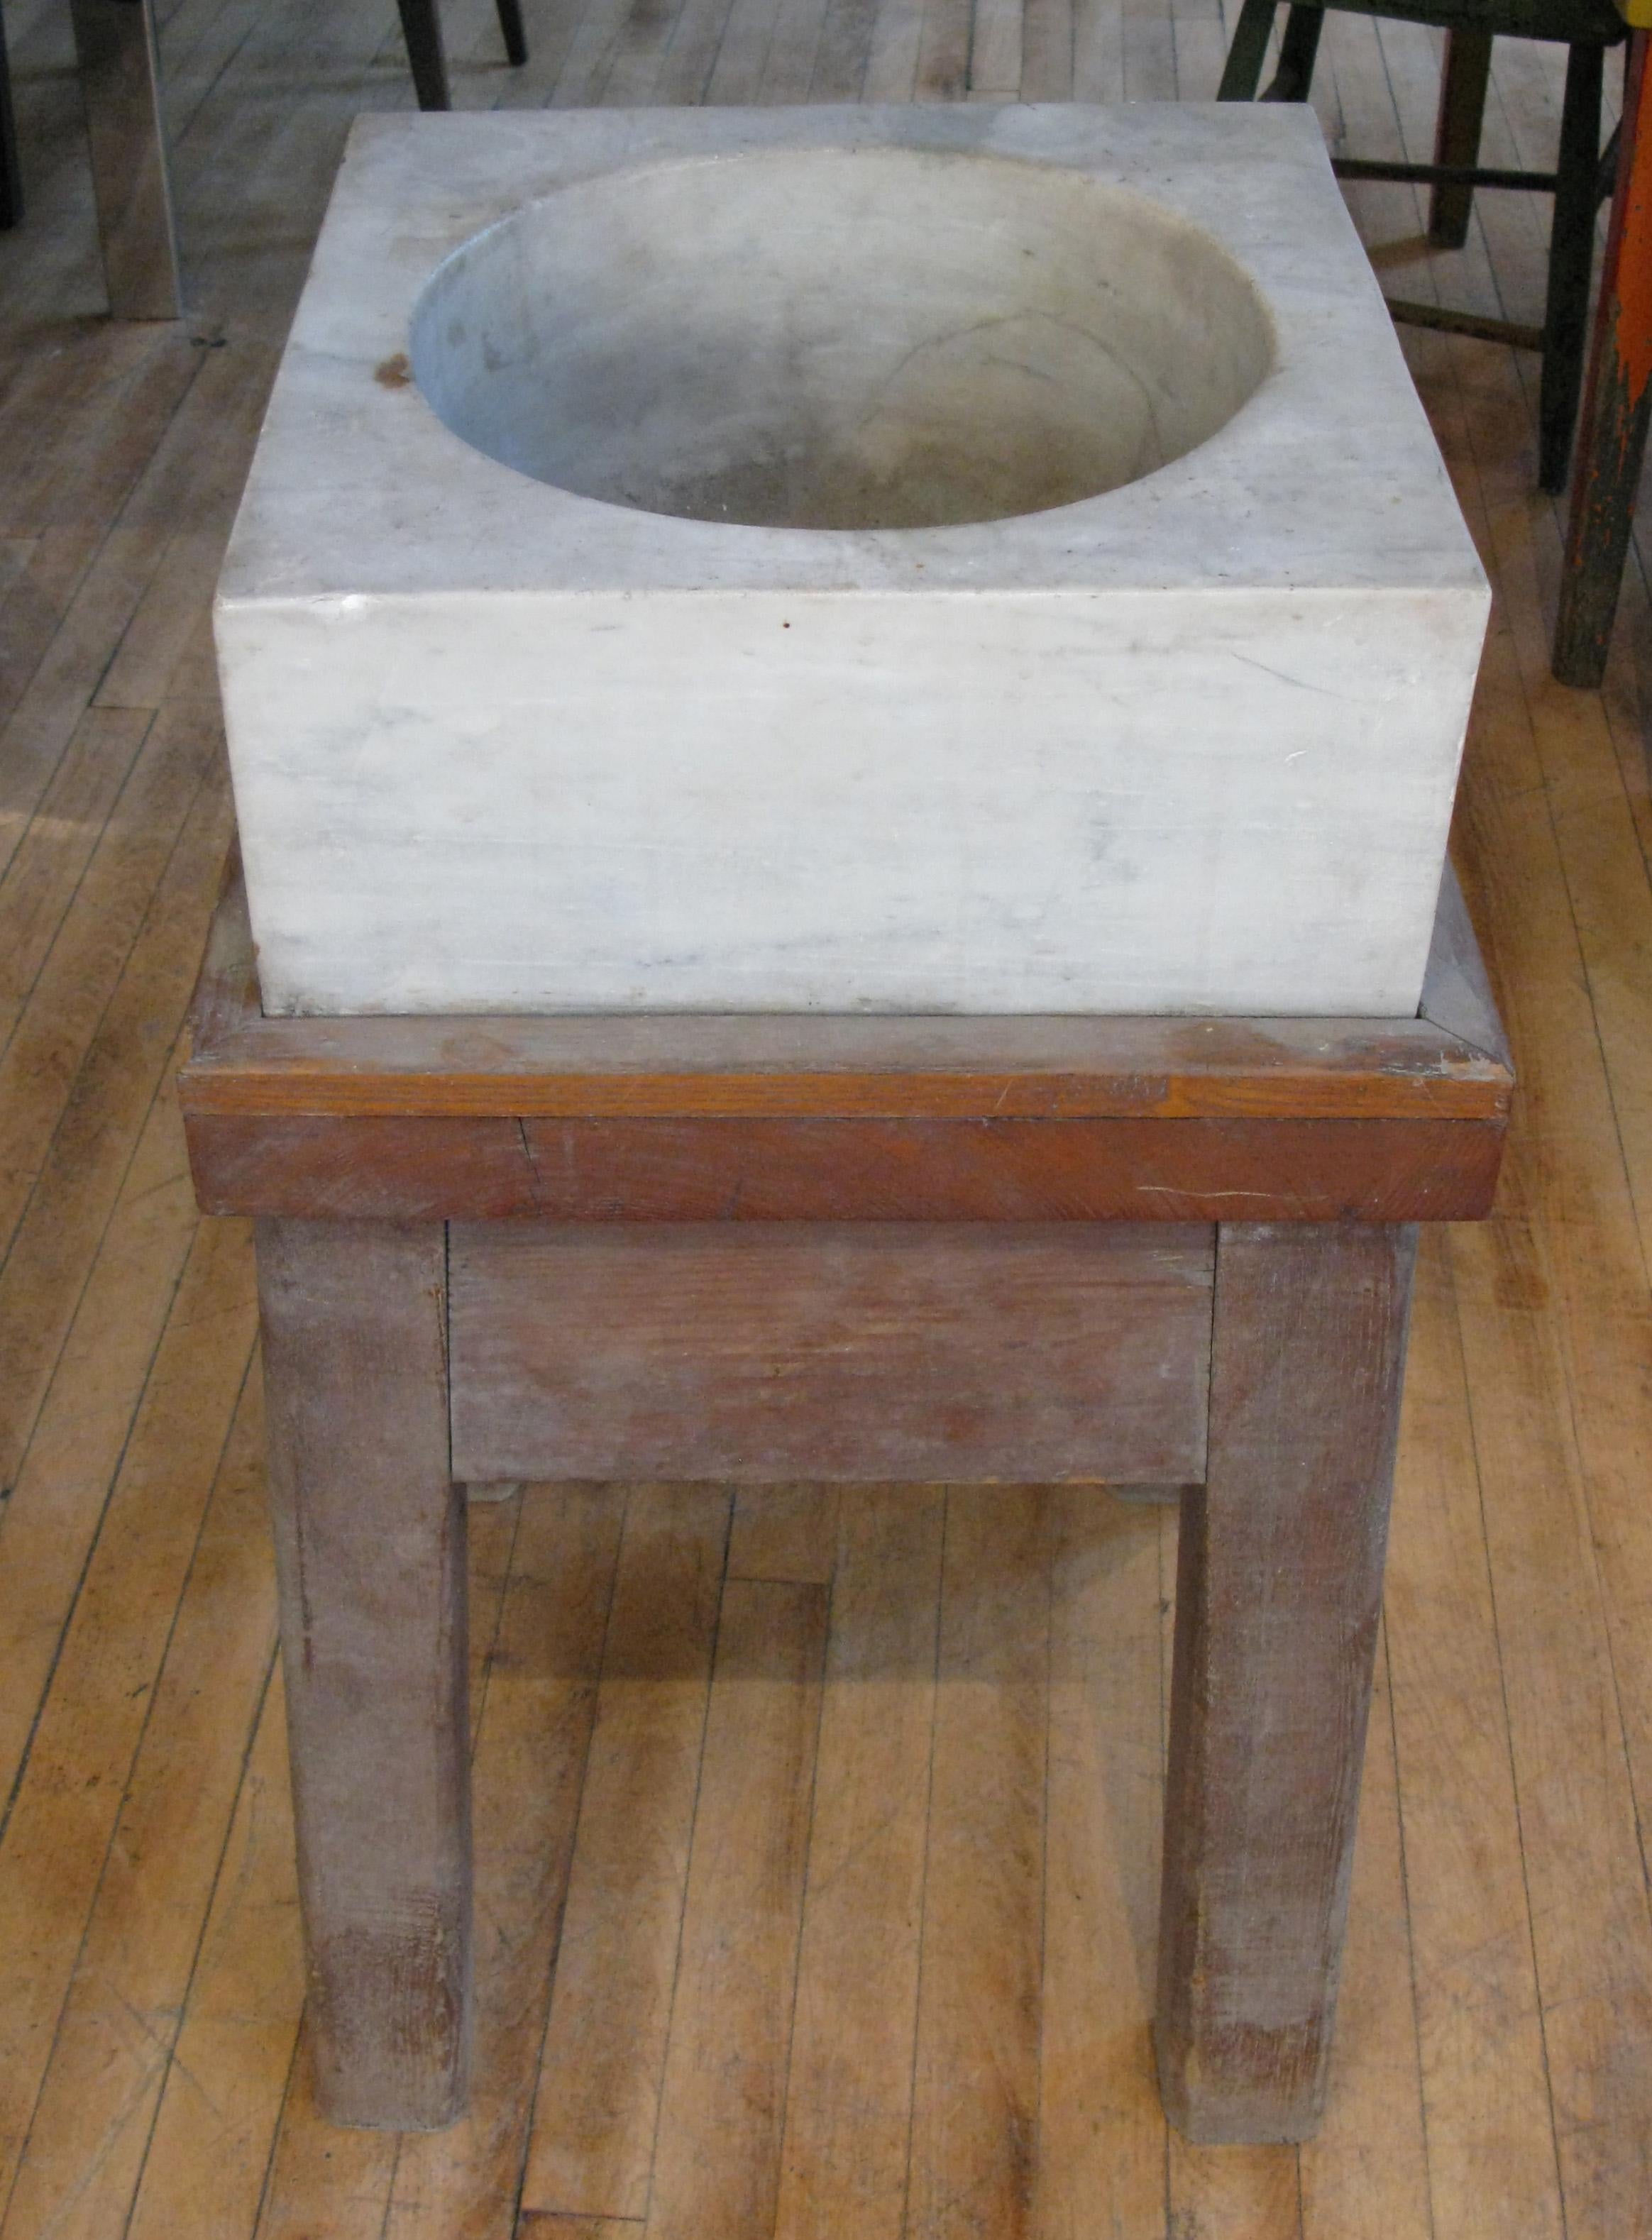 A very handsome and unique antique late 19th century marble mortar on its original oak stand, from the Harold Brown Villa in Newport, RI. this was used for grinding and preparing spices and herbs. the house was decorated by Ogden Codman, who also